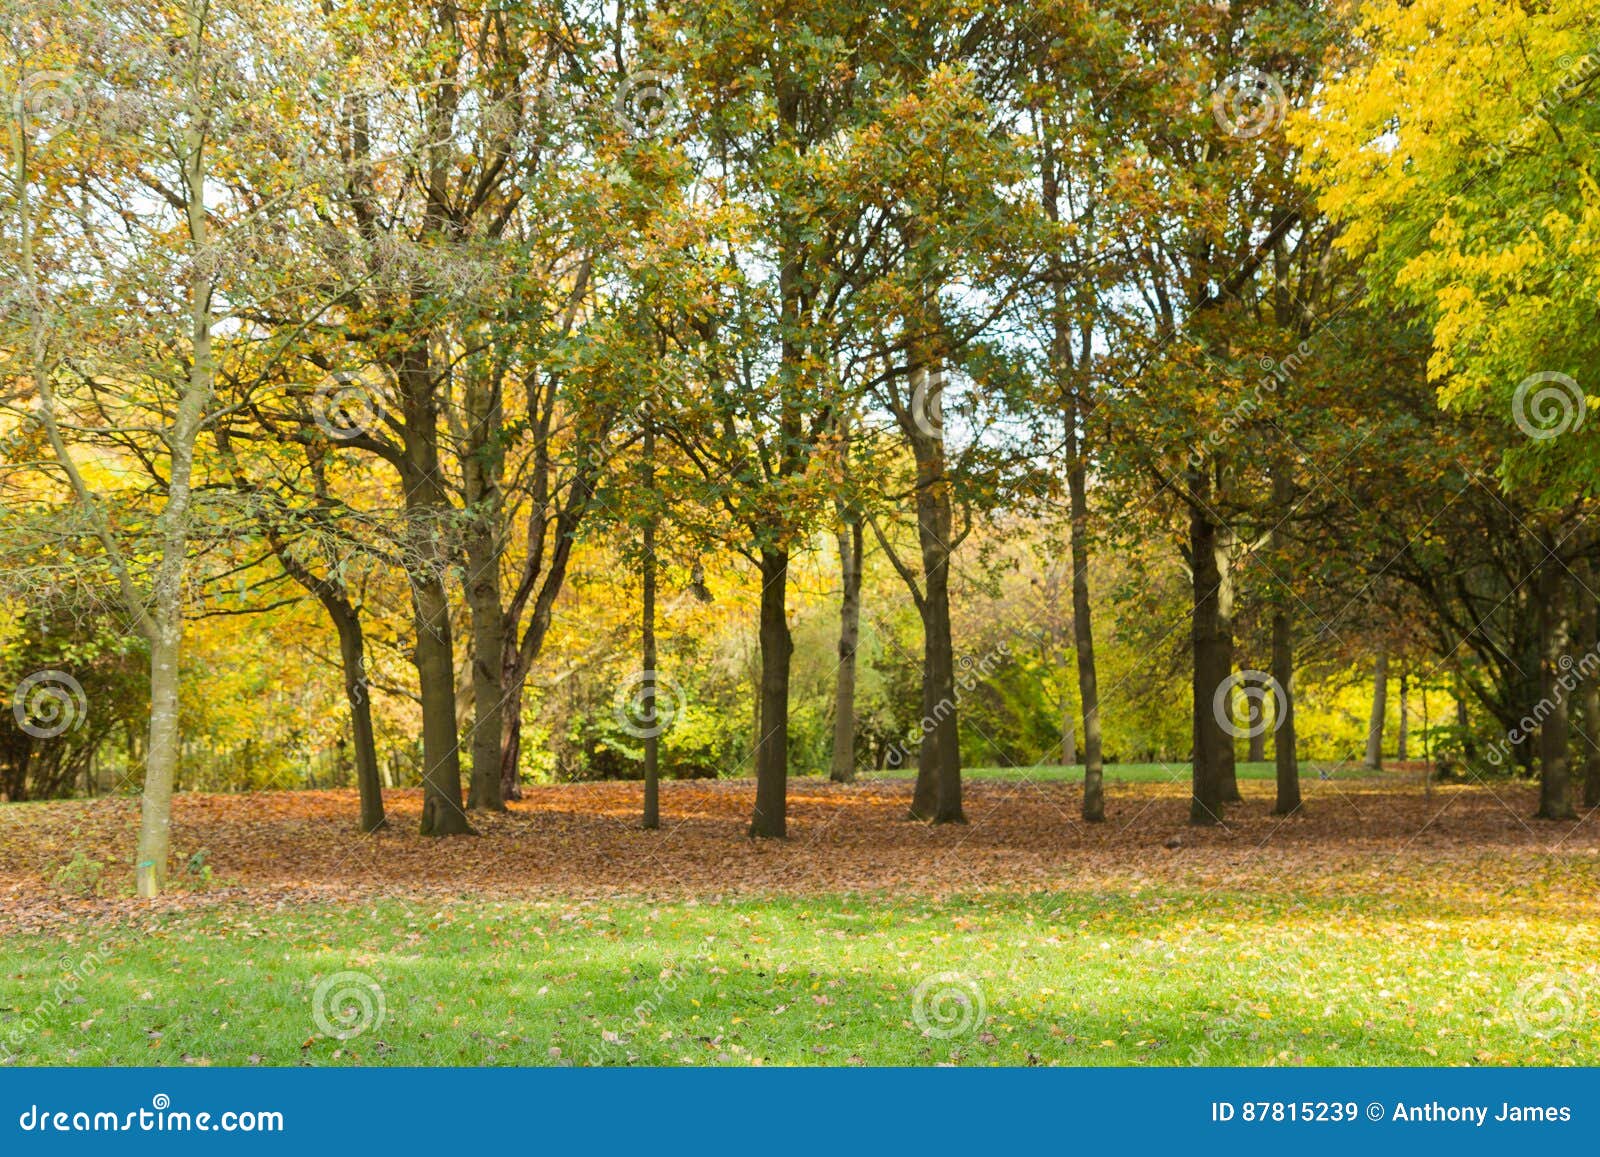 Local Park Autumn Time in a Wooded Area. Stock Image - Image of leaves ...